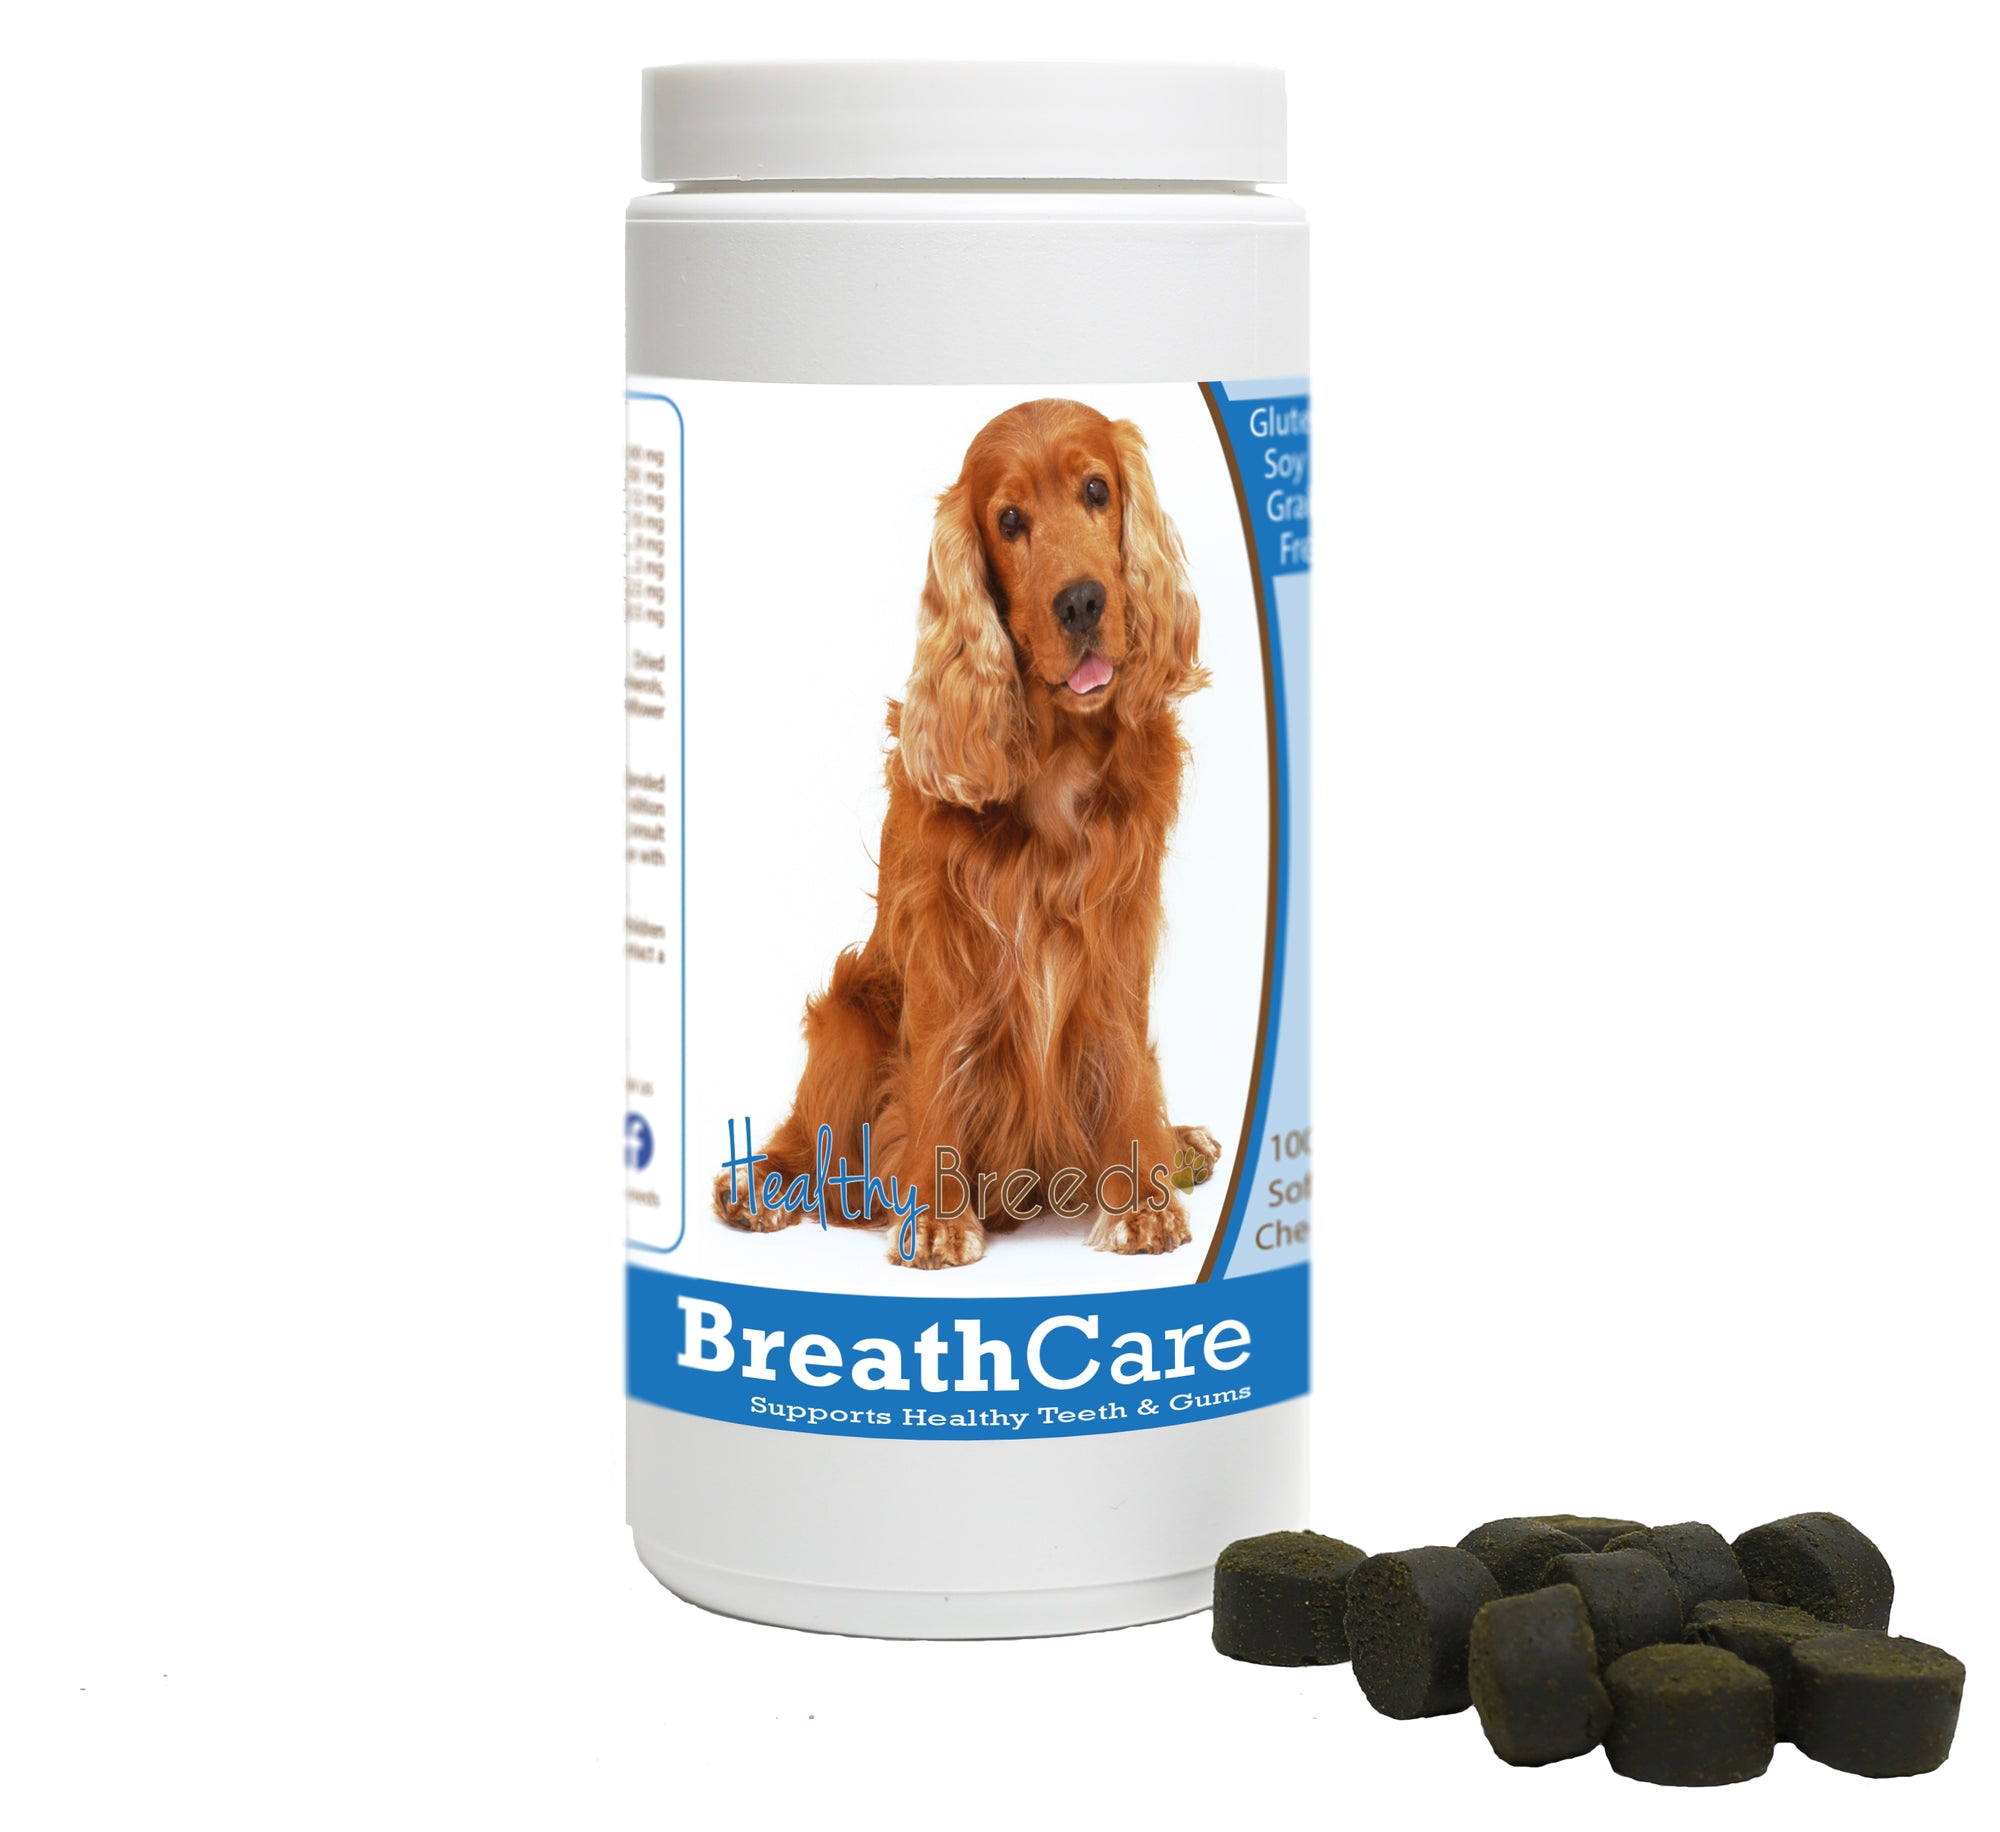 Healthy Breeds Cocker Spaniel Breath Care Soft Chews for Dogs 60 Count